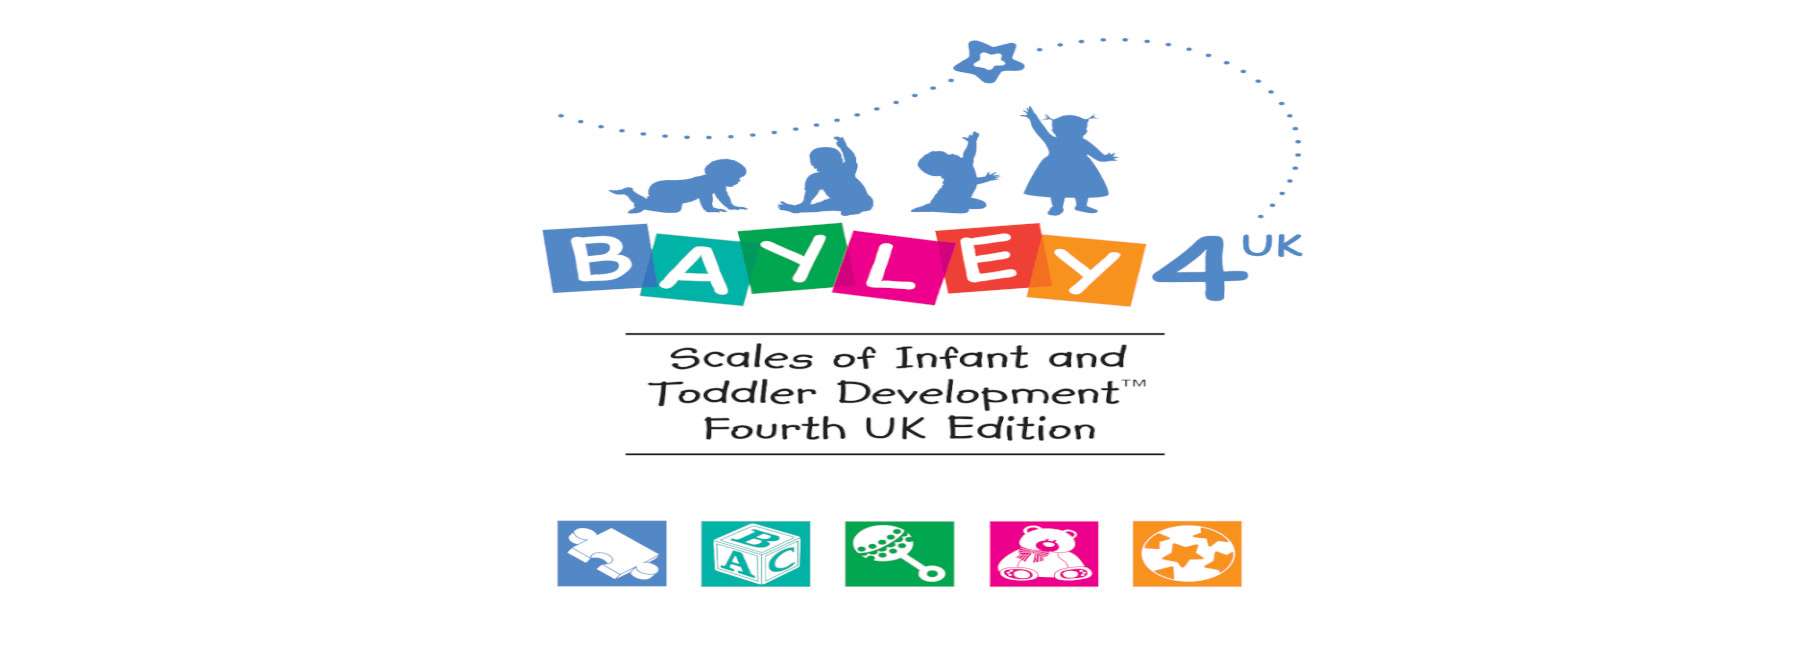  New Bayley Scales of Infant and Toddler Development, Fourth UK Edition (Bayley–4 UK)